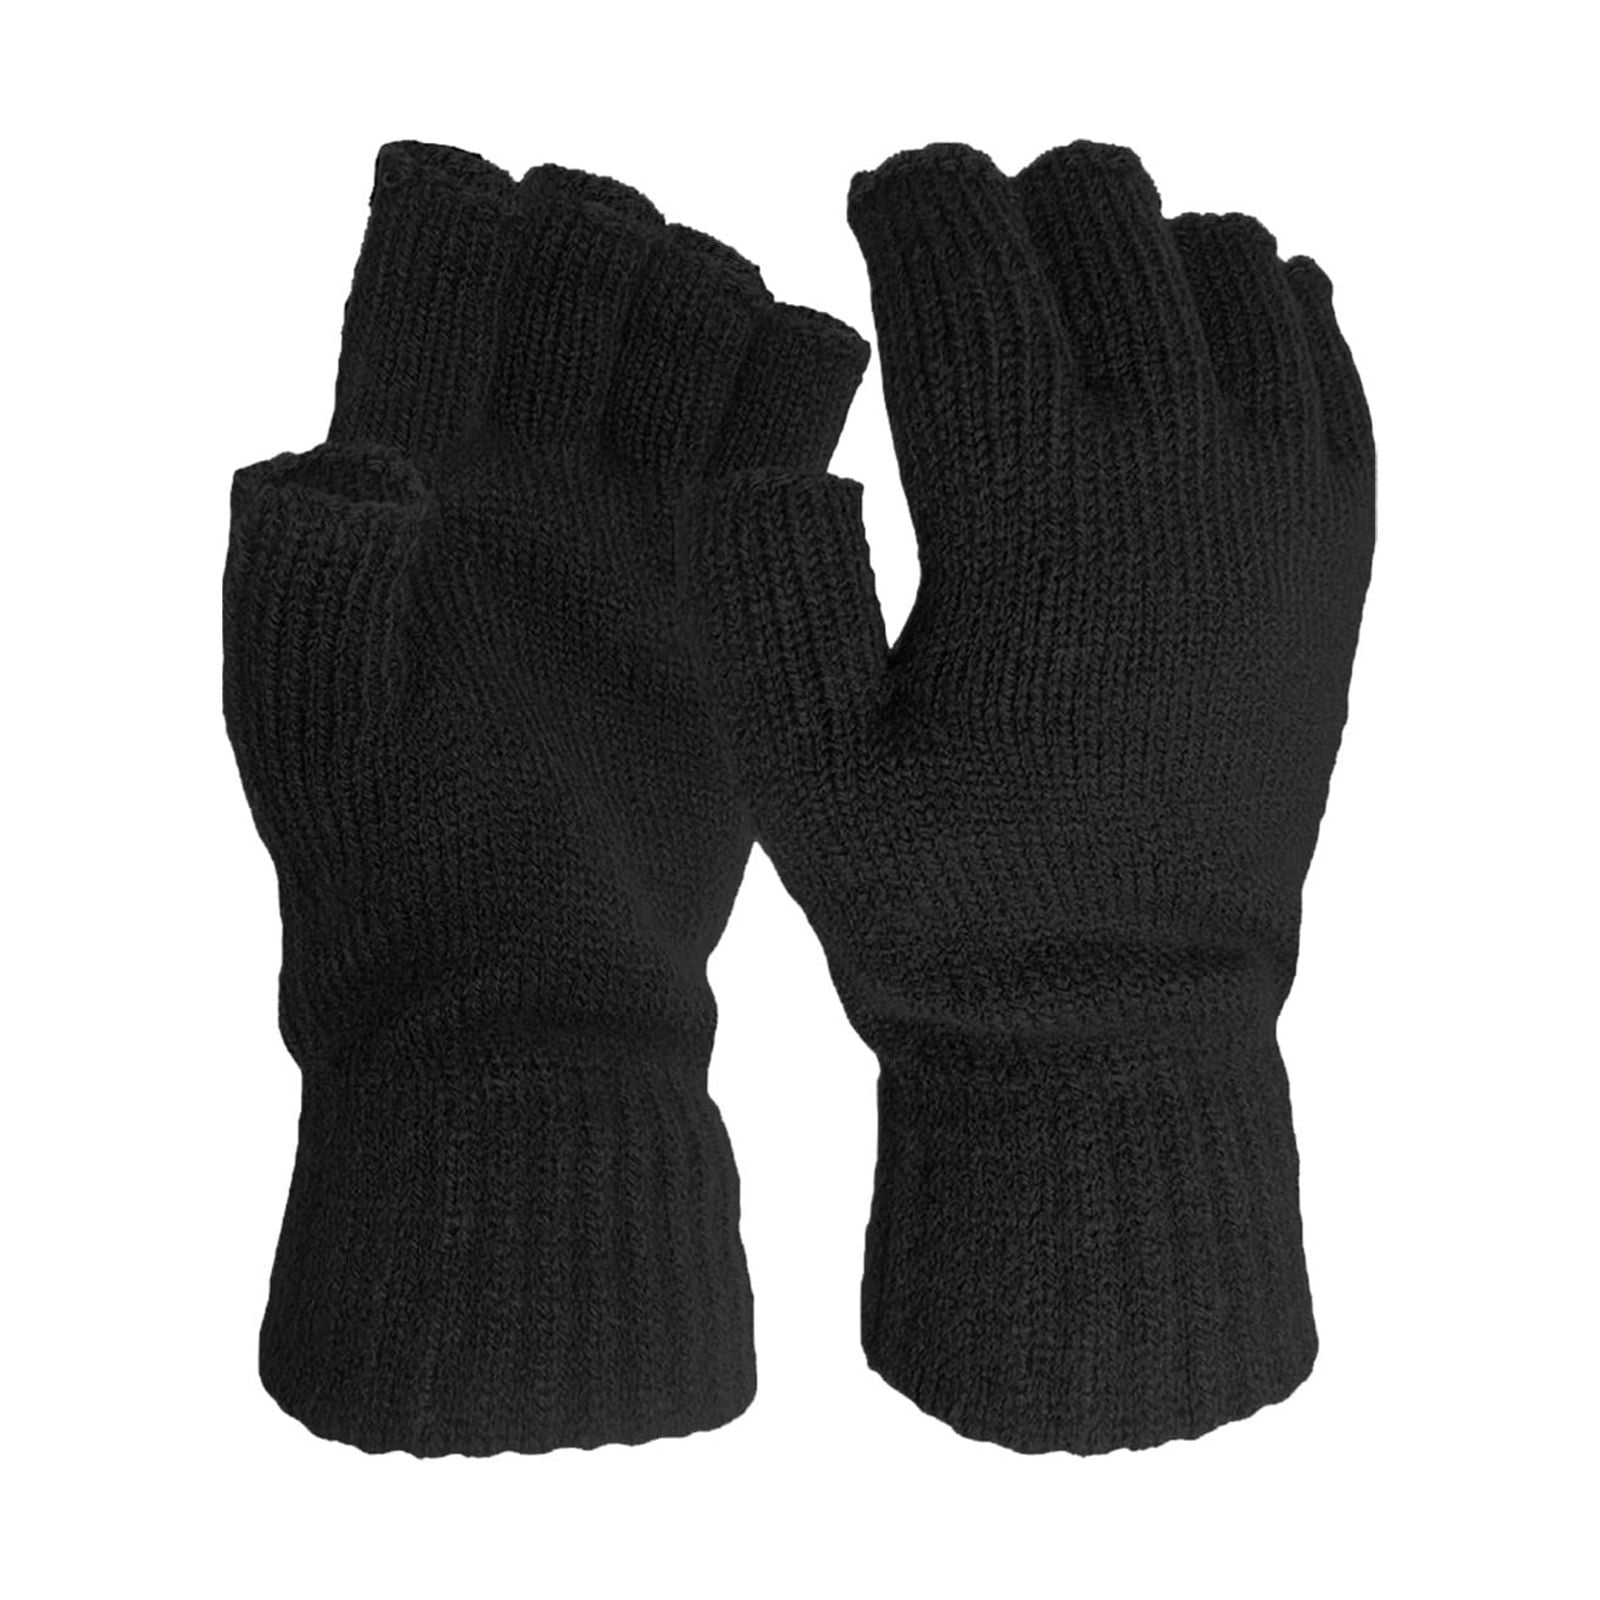 Grey gloves Gloves Warm Solid warm Frehsky Knitted Color Half-finger Winter Men\'s Women\'s And